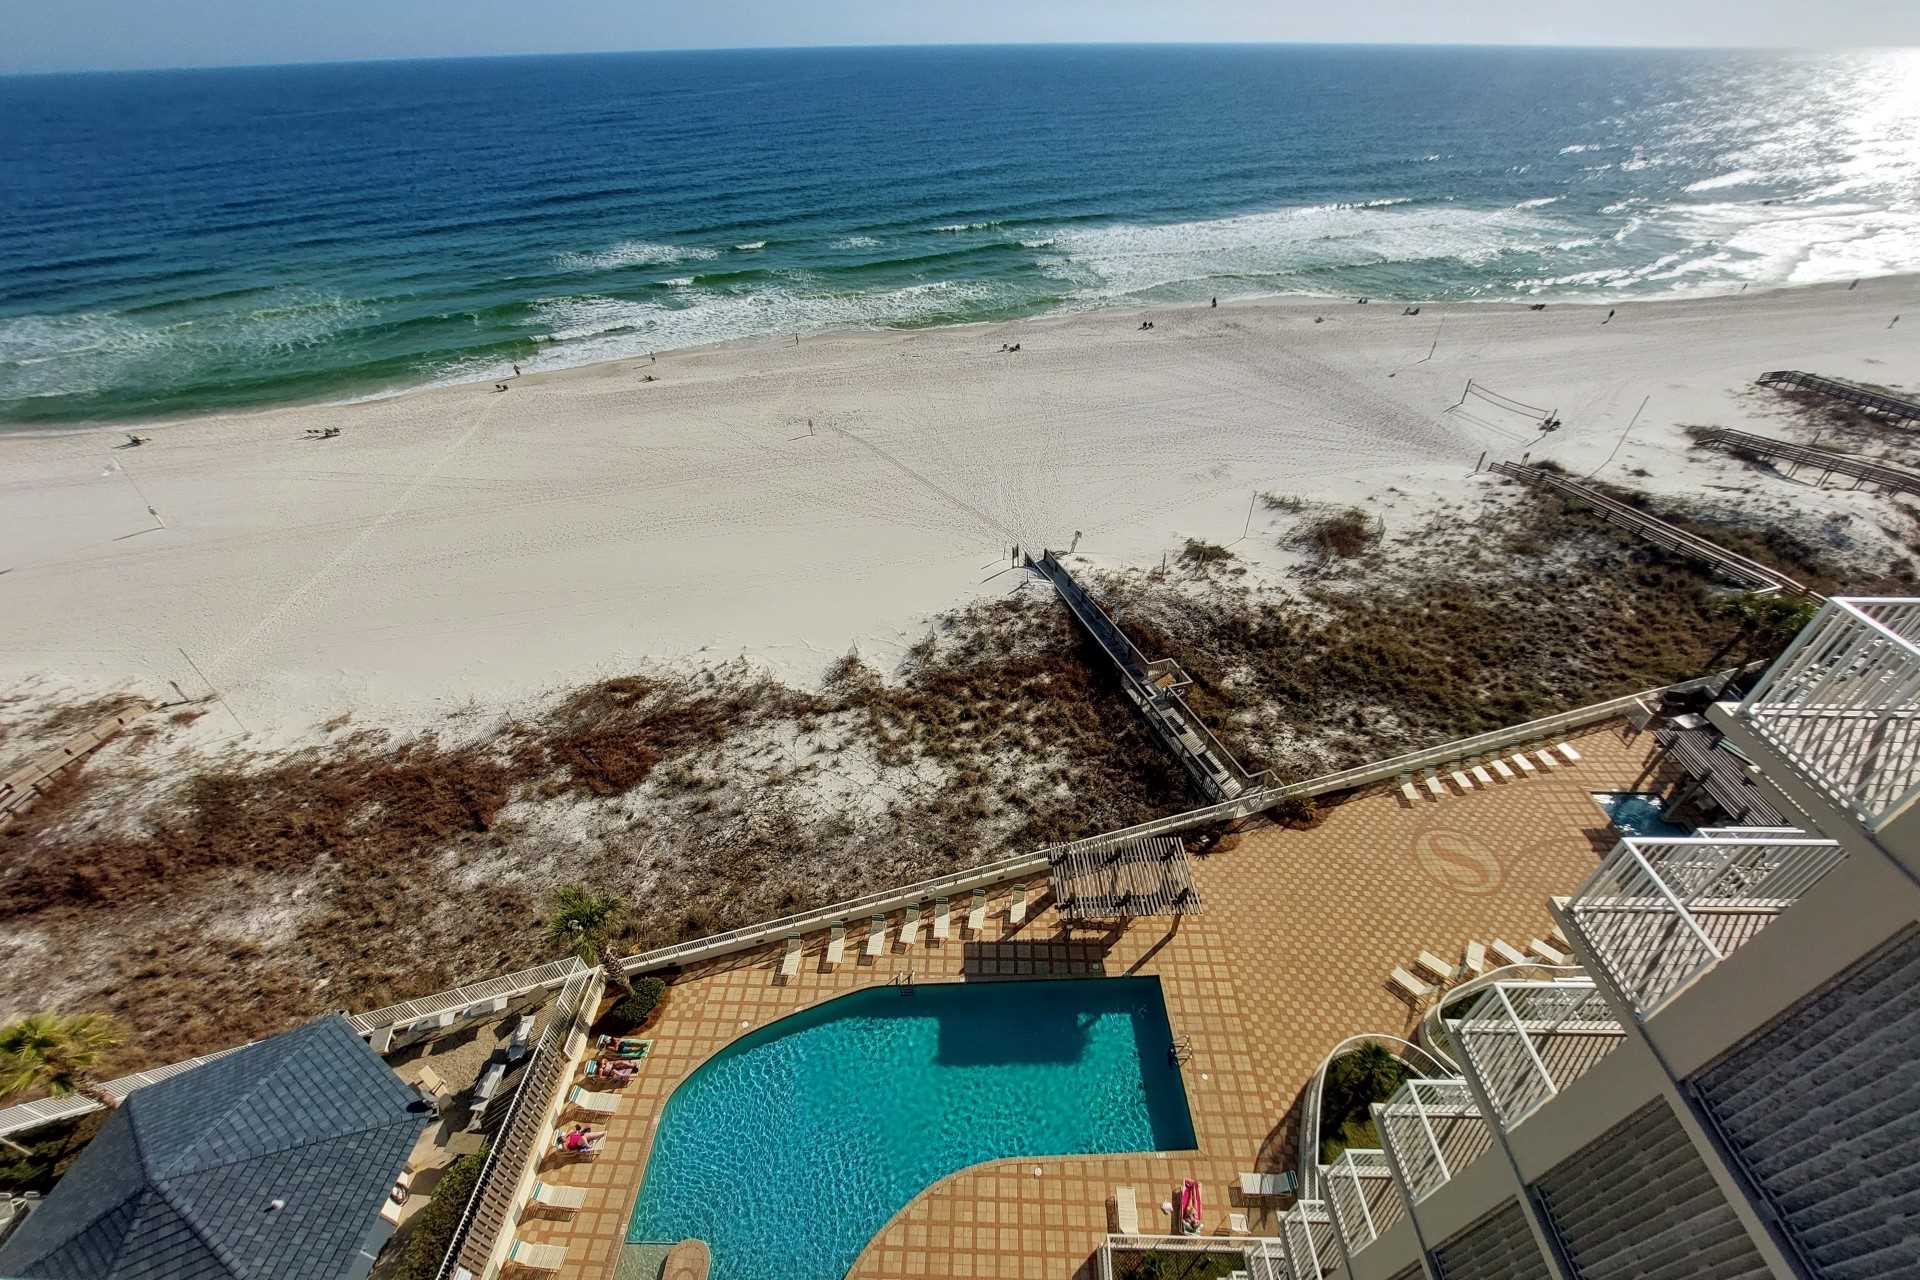 A view from the balcony of the unit Shoalwater 1102 located in Gulf Shores. The view is overlooking the pool and has beachfront views